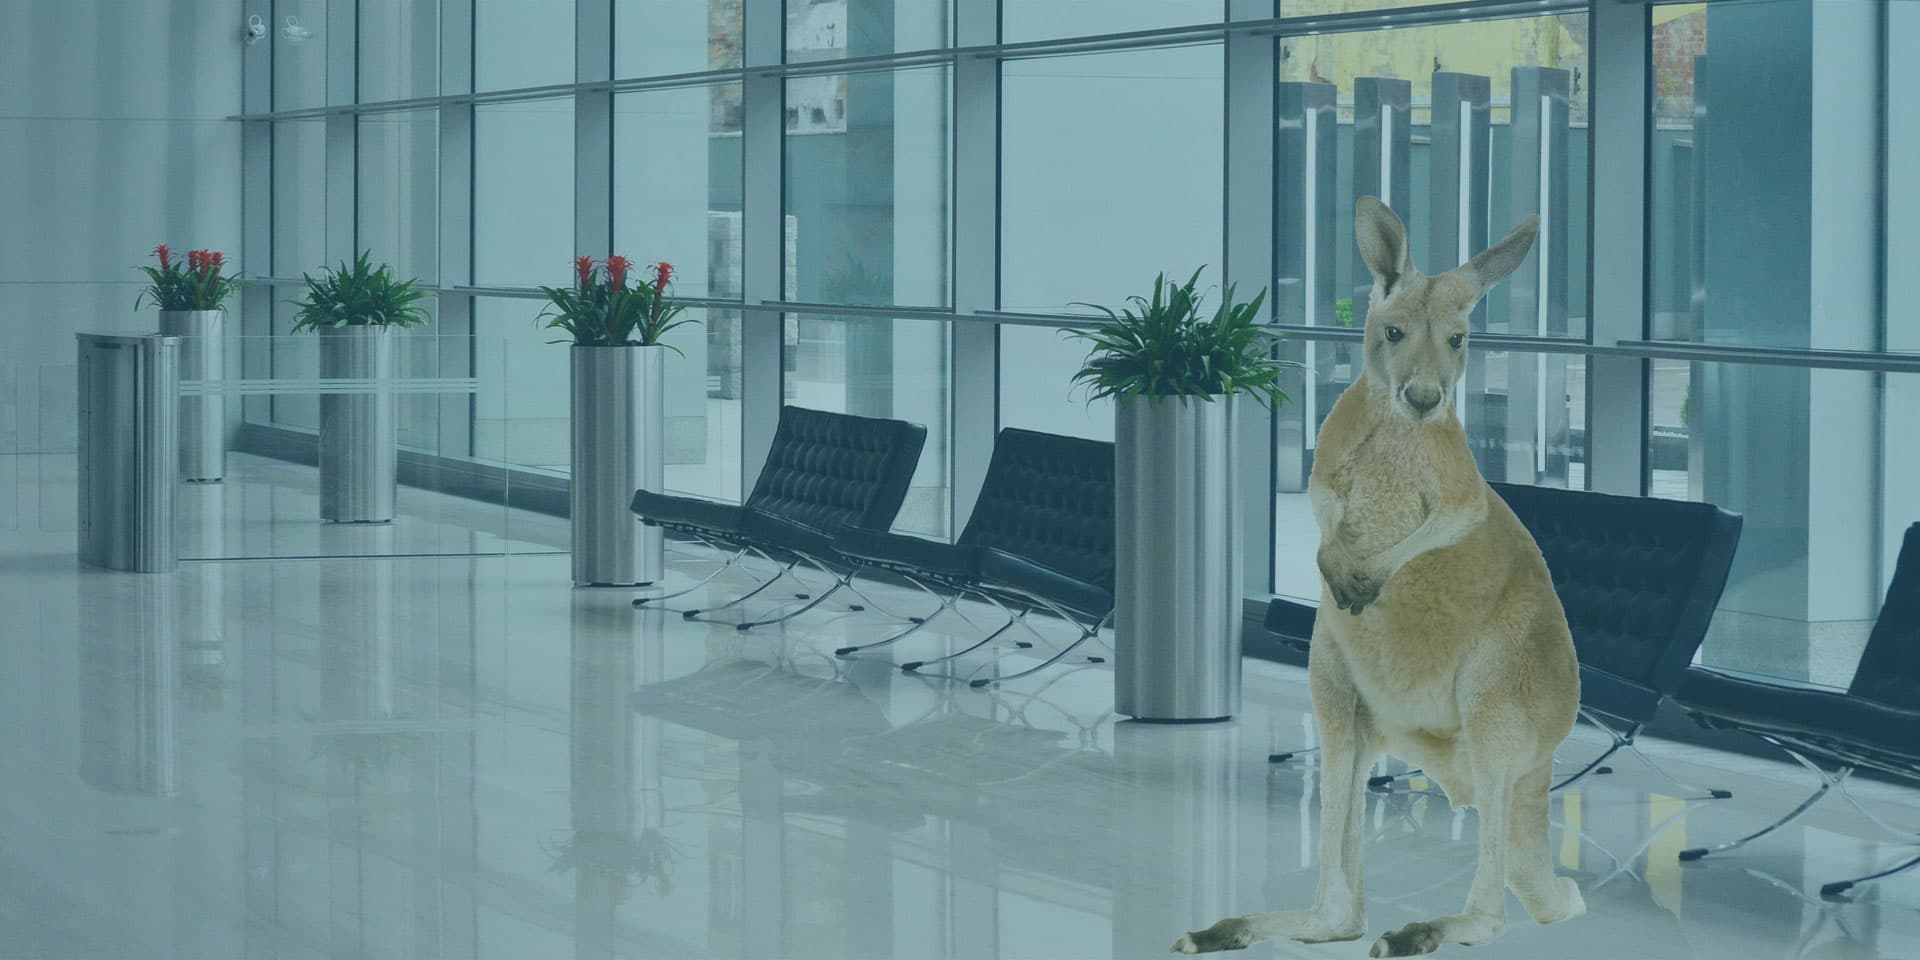 Kangaroo standing in a modern office building lobby with chairs and plants in silver cylindrical planters